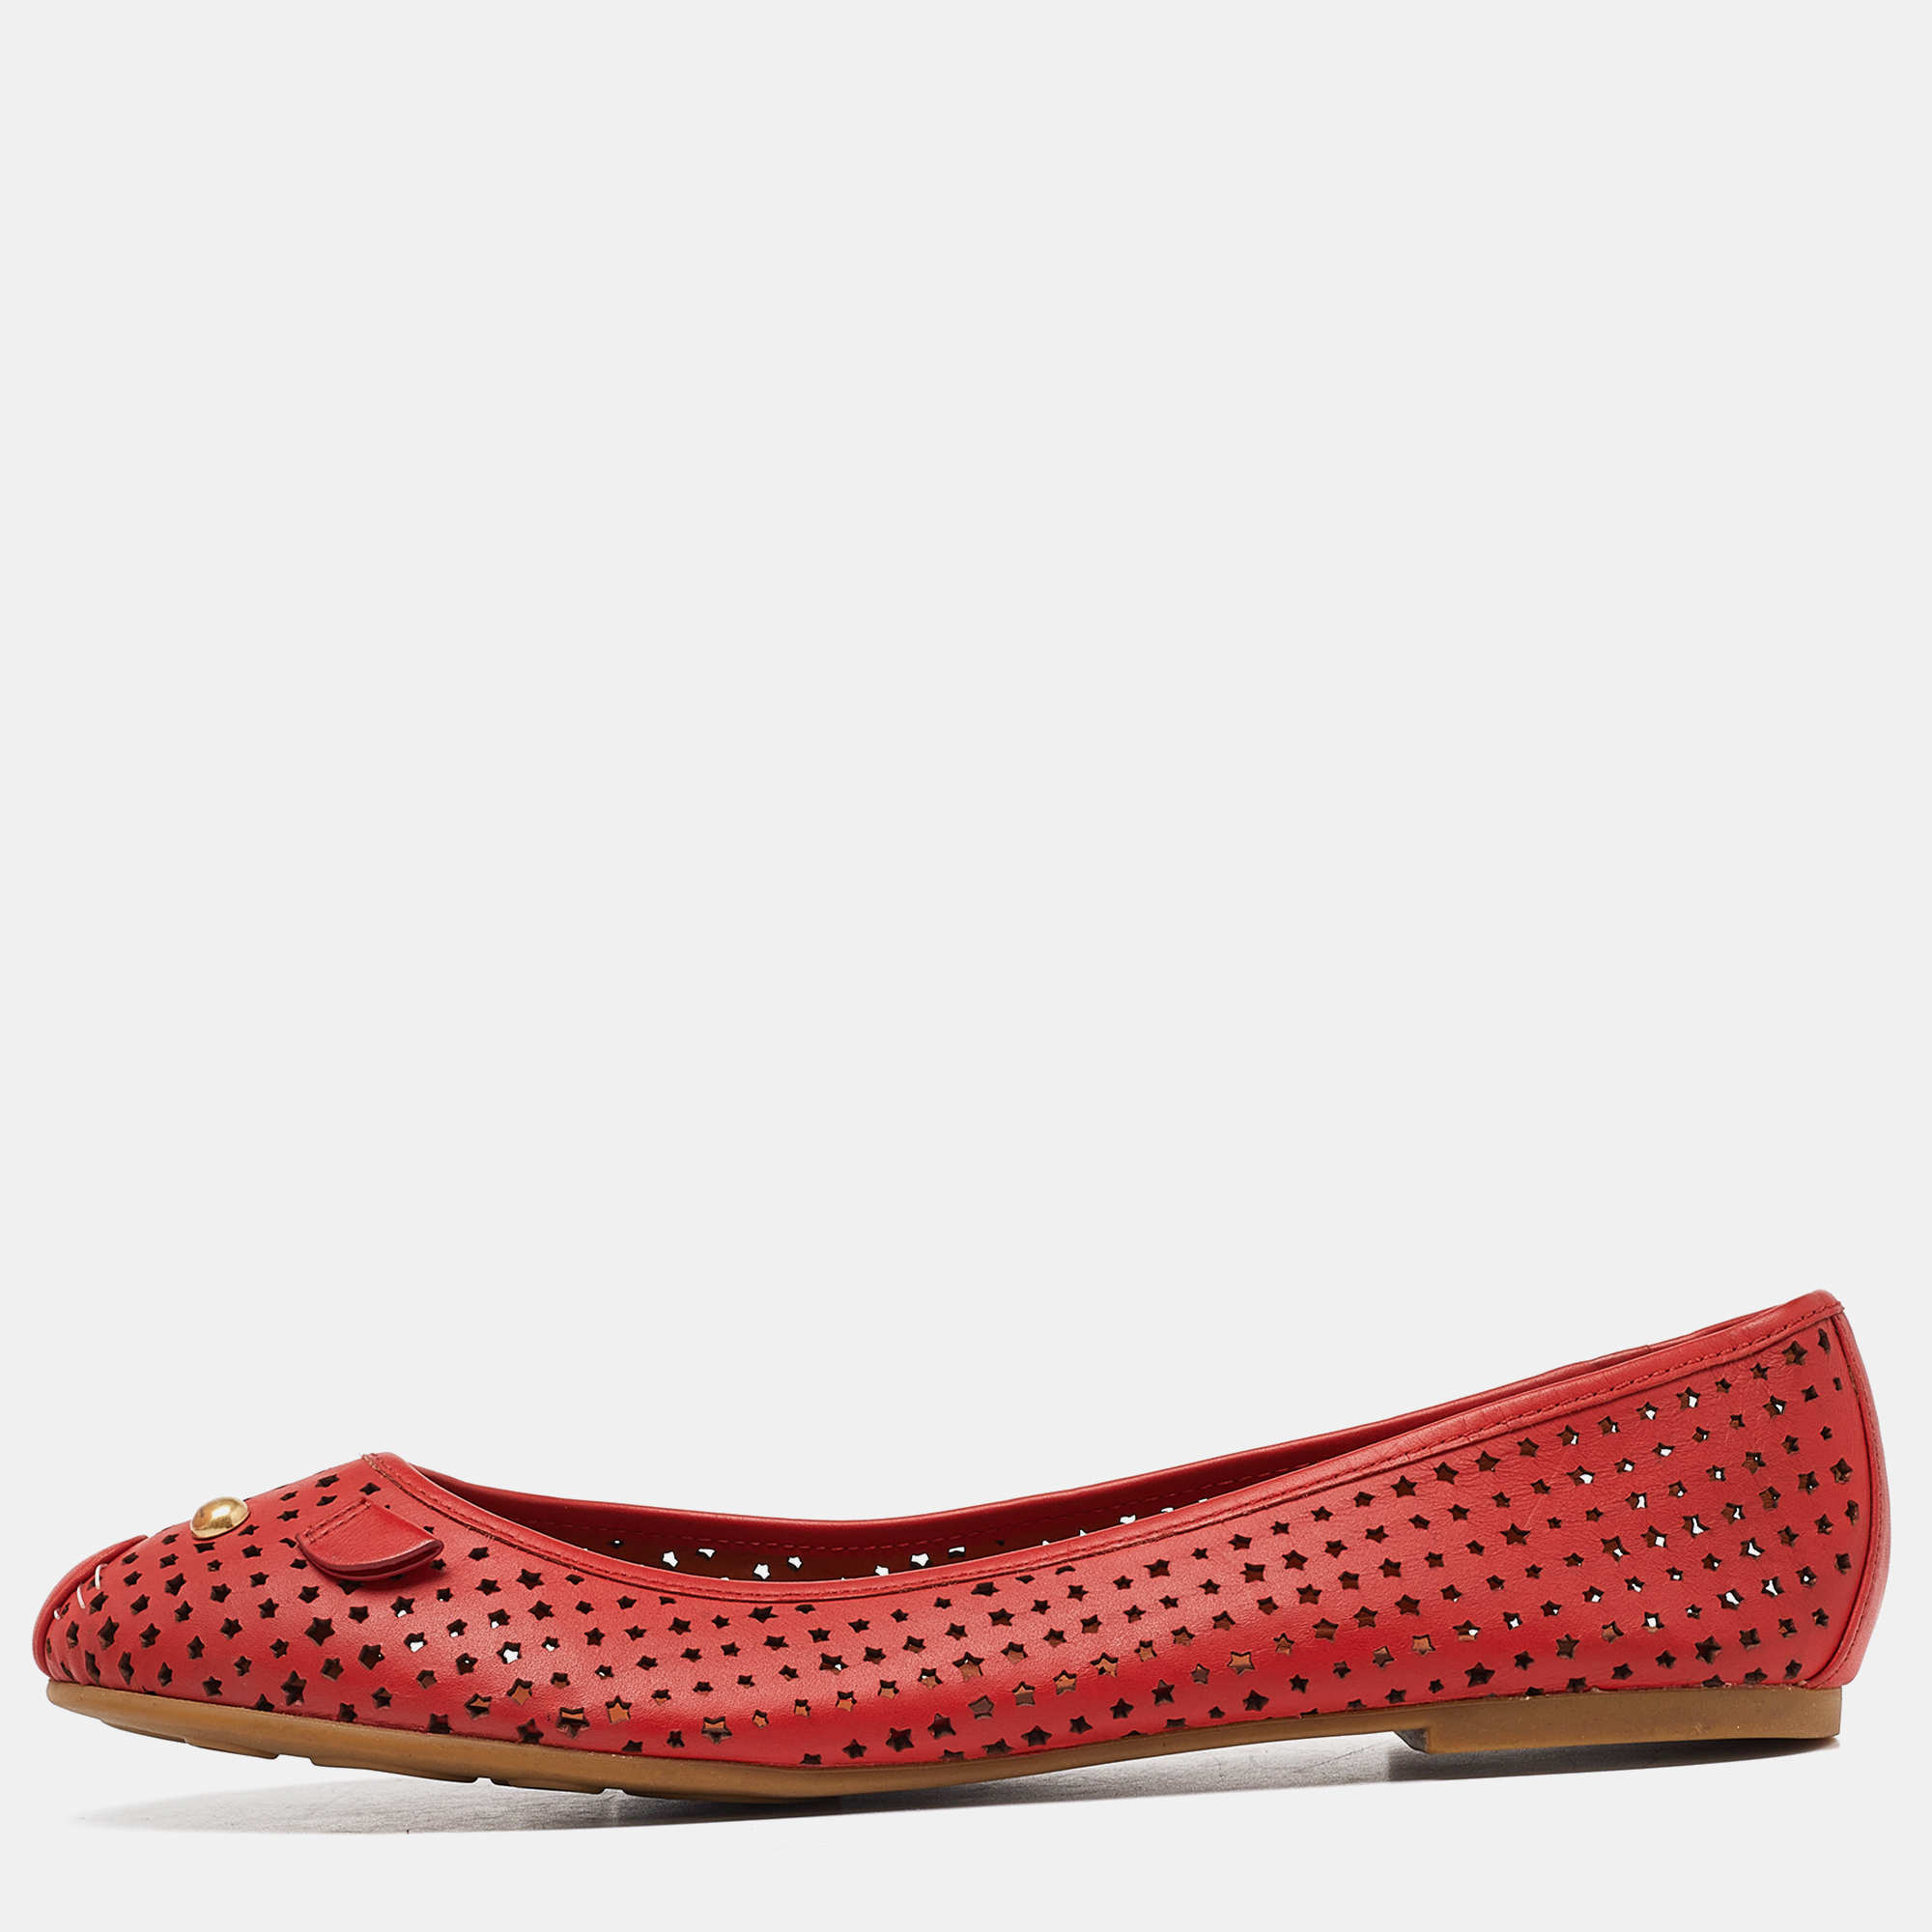 Marc by marc jacobs red laser cut out leather ballet flats size 39